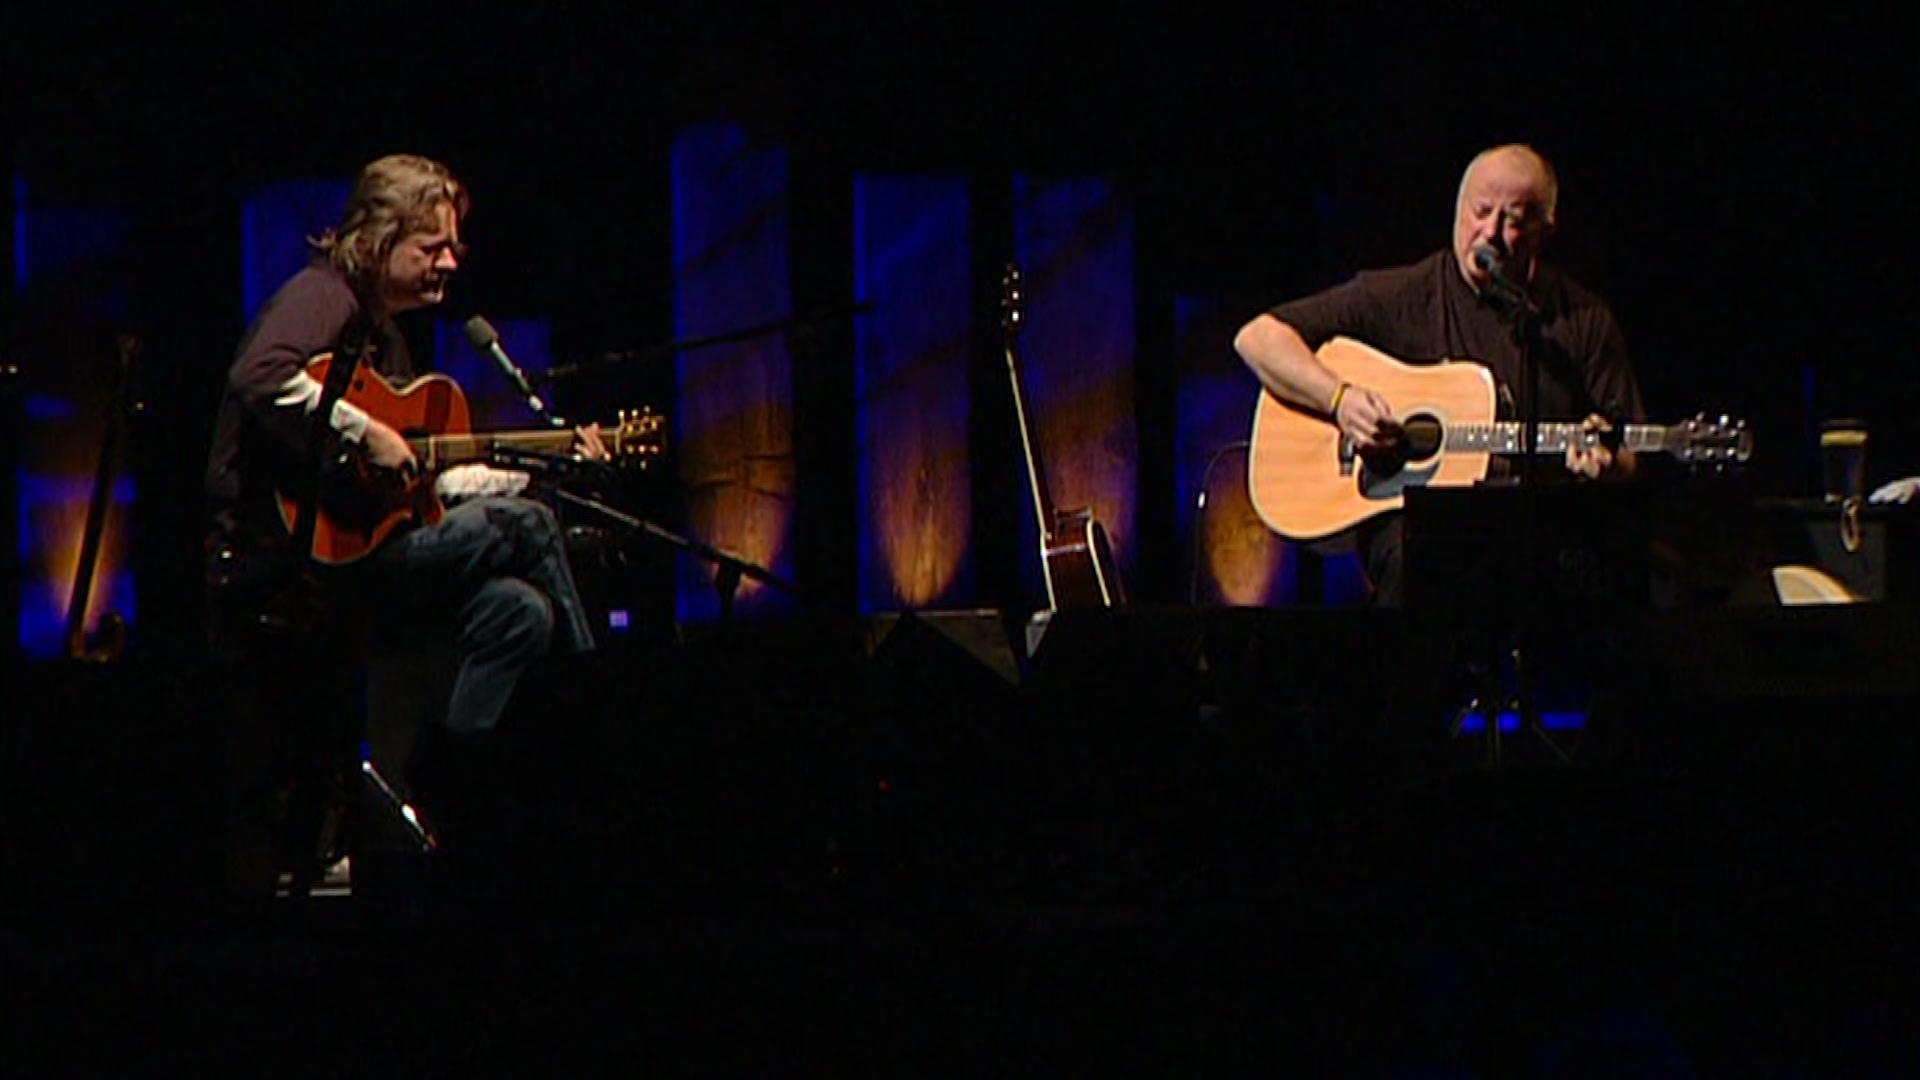 Christy Moore - Motherland (Live at The Point, 2006)